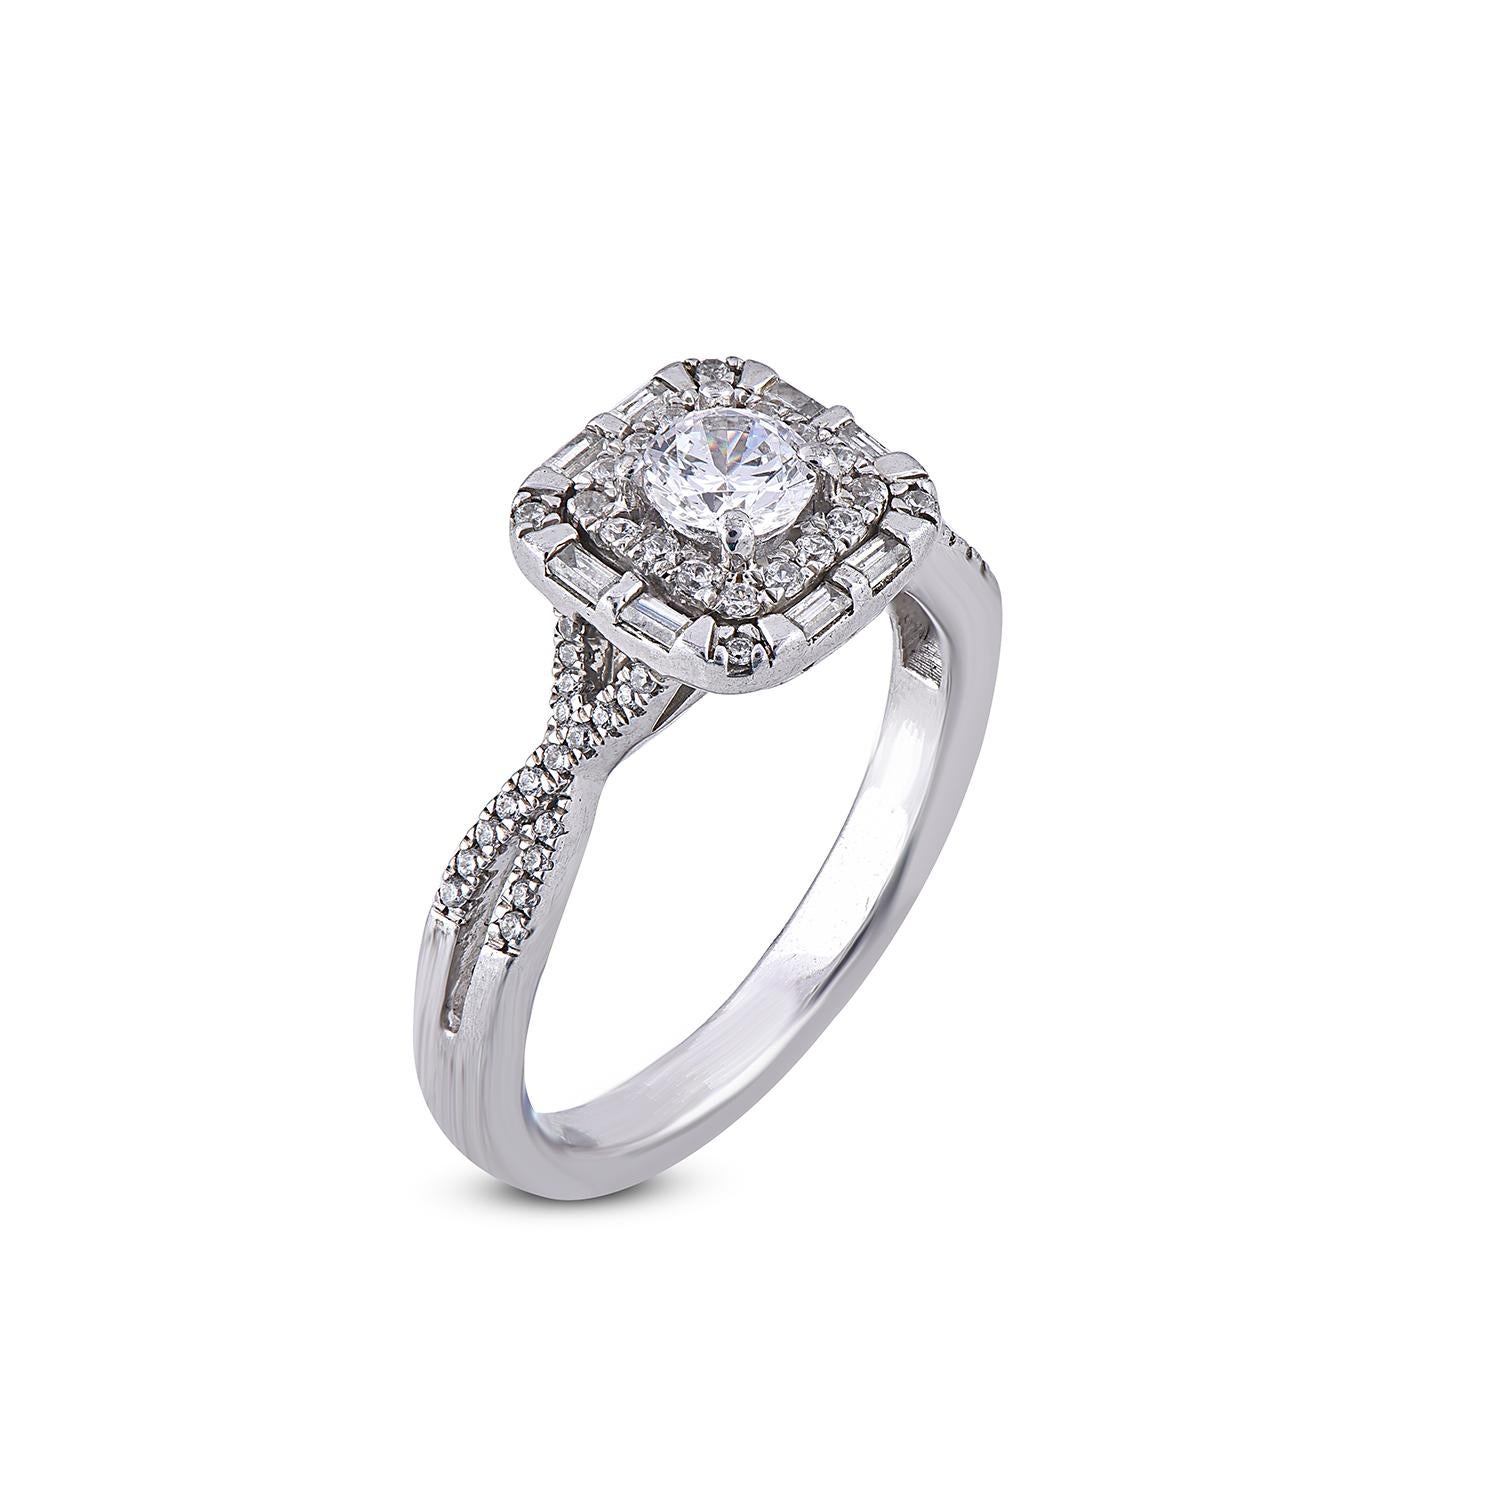 Exquisite diamond engagement ring features with 0.33 ct centre stone and 0.32 ct of diamond frame and shank lined diamonds. Expertly Crafted of sparkling 18 karat solid white gold in high polish finish and set with 57 sparkling round and 8 Bagurtte